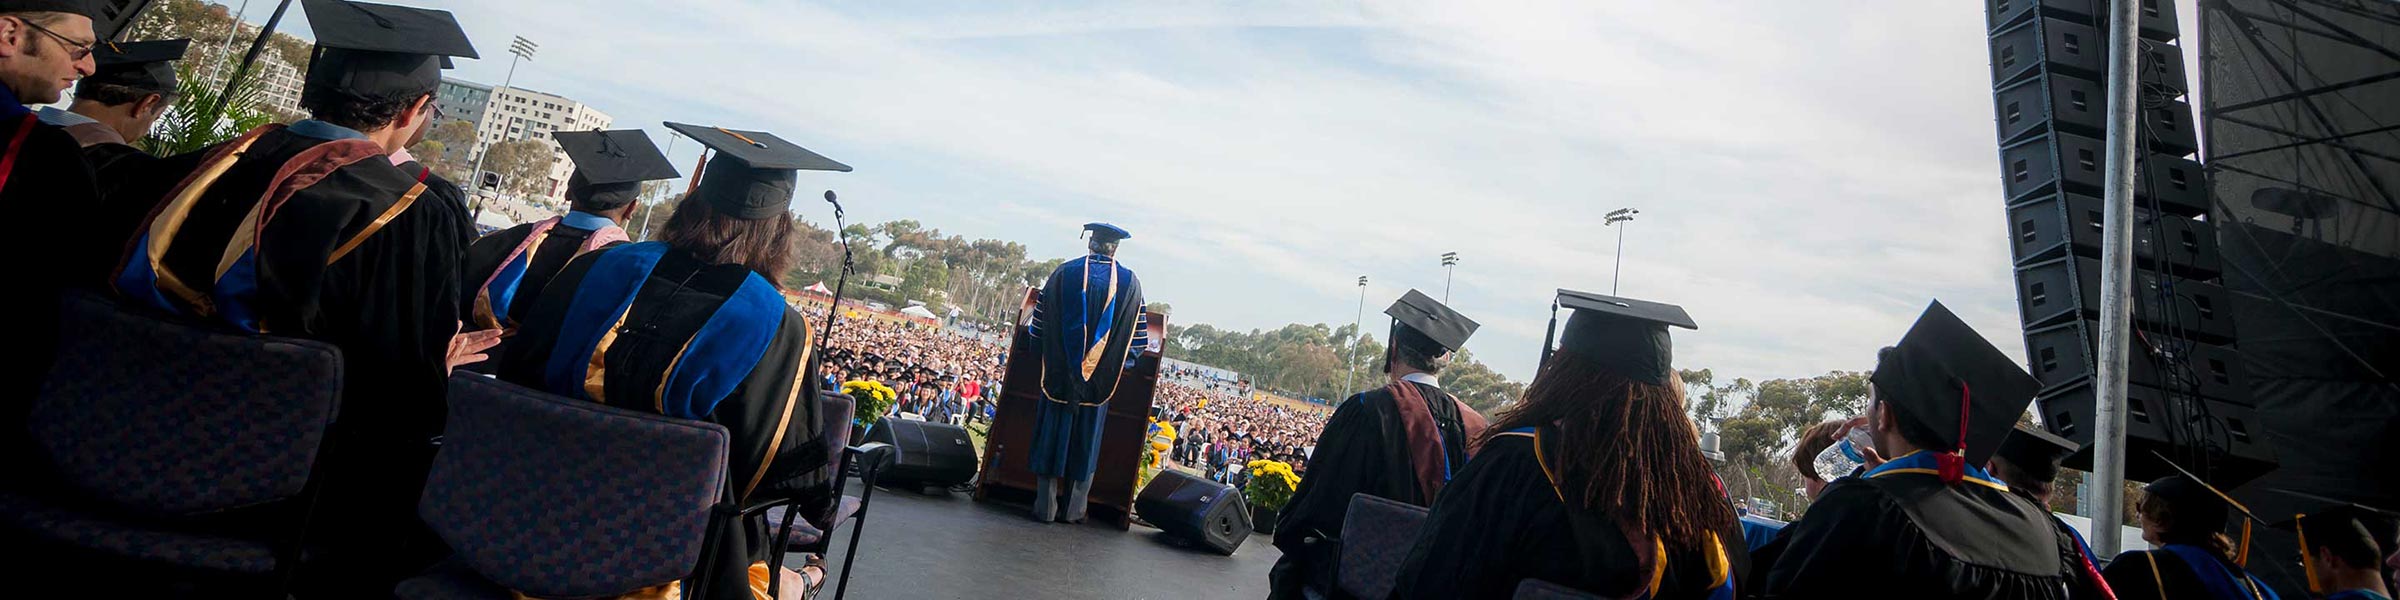 Faculty on stage at UC San Diego Commencement